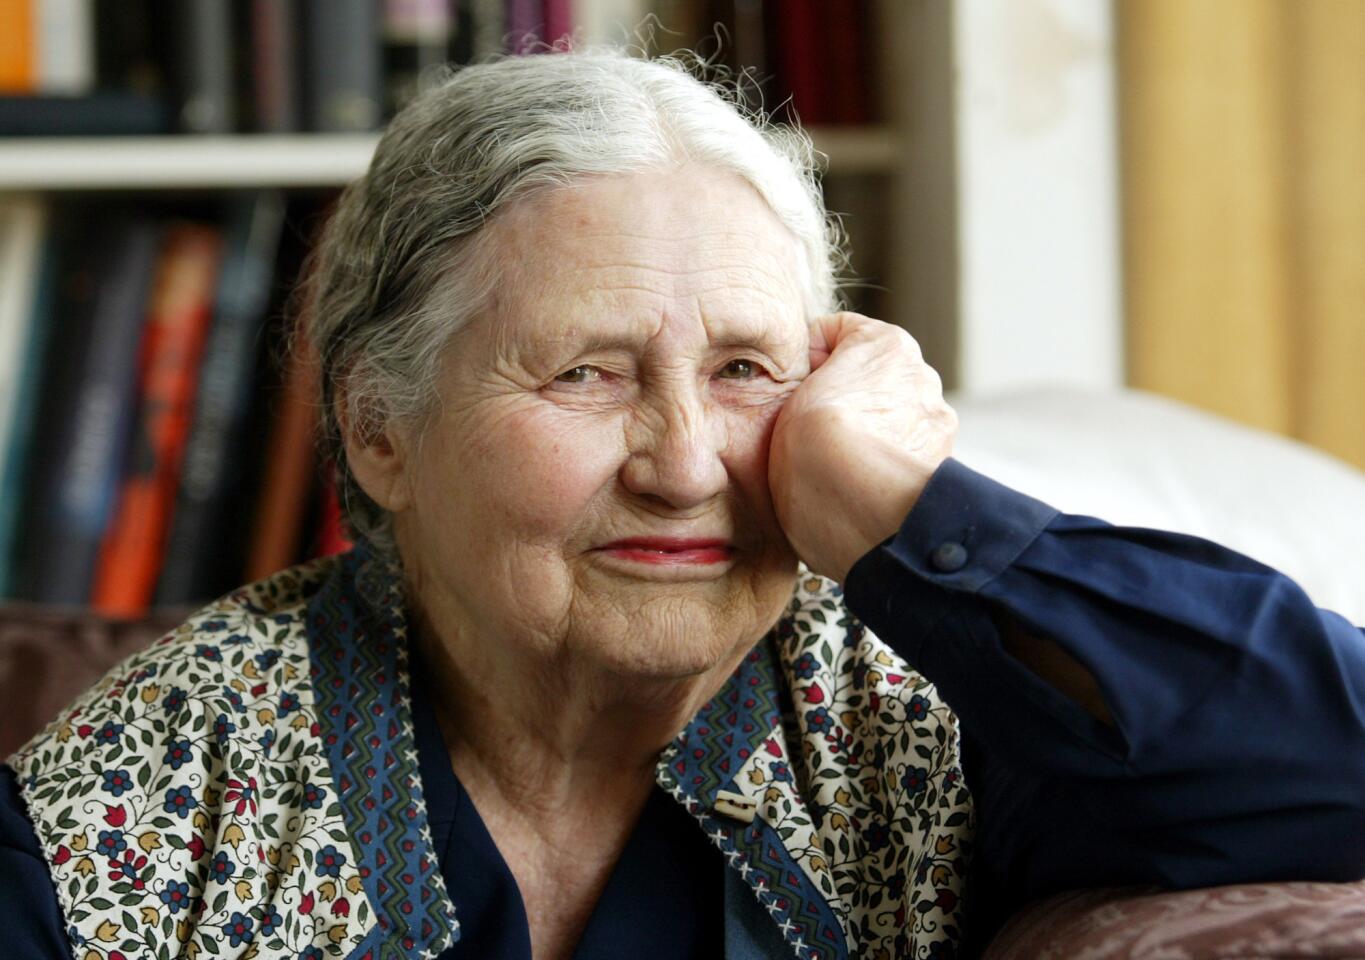 Nobel Prize winner Doris Lessing died Nov. 17 at age 94. Born in Iran, raised in Zimbabwe (then Rhodesia) and later settling in London, Lessing "reveled in her status as a contrarian," the Los Angeles Times' David L. Ulin wrote. Lessing -- feminist, realist, experimentalist, science-fiction writer and more -- was best known for her novel "The Golden Notebook."